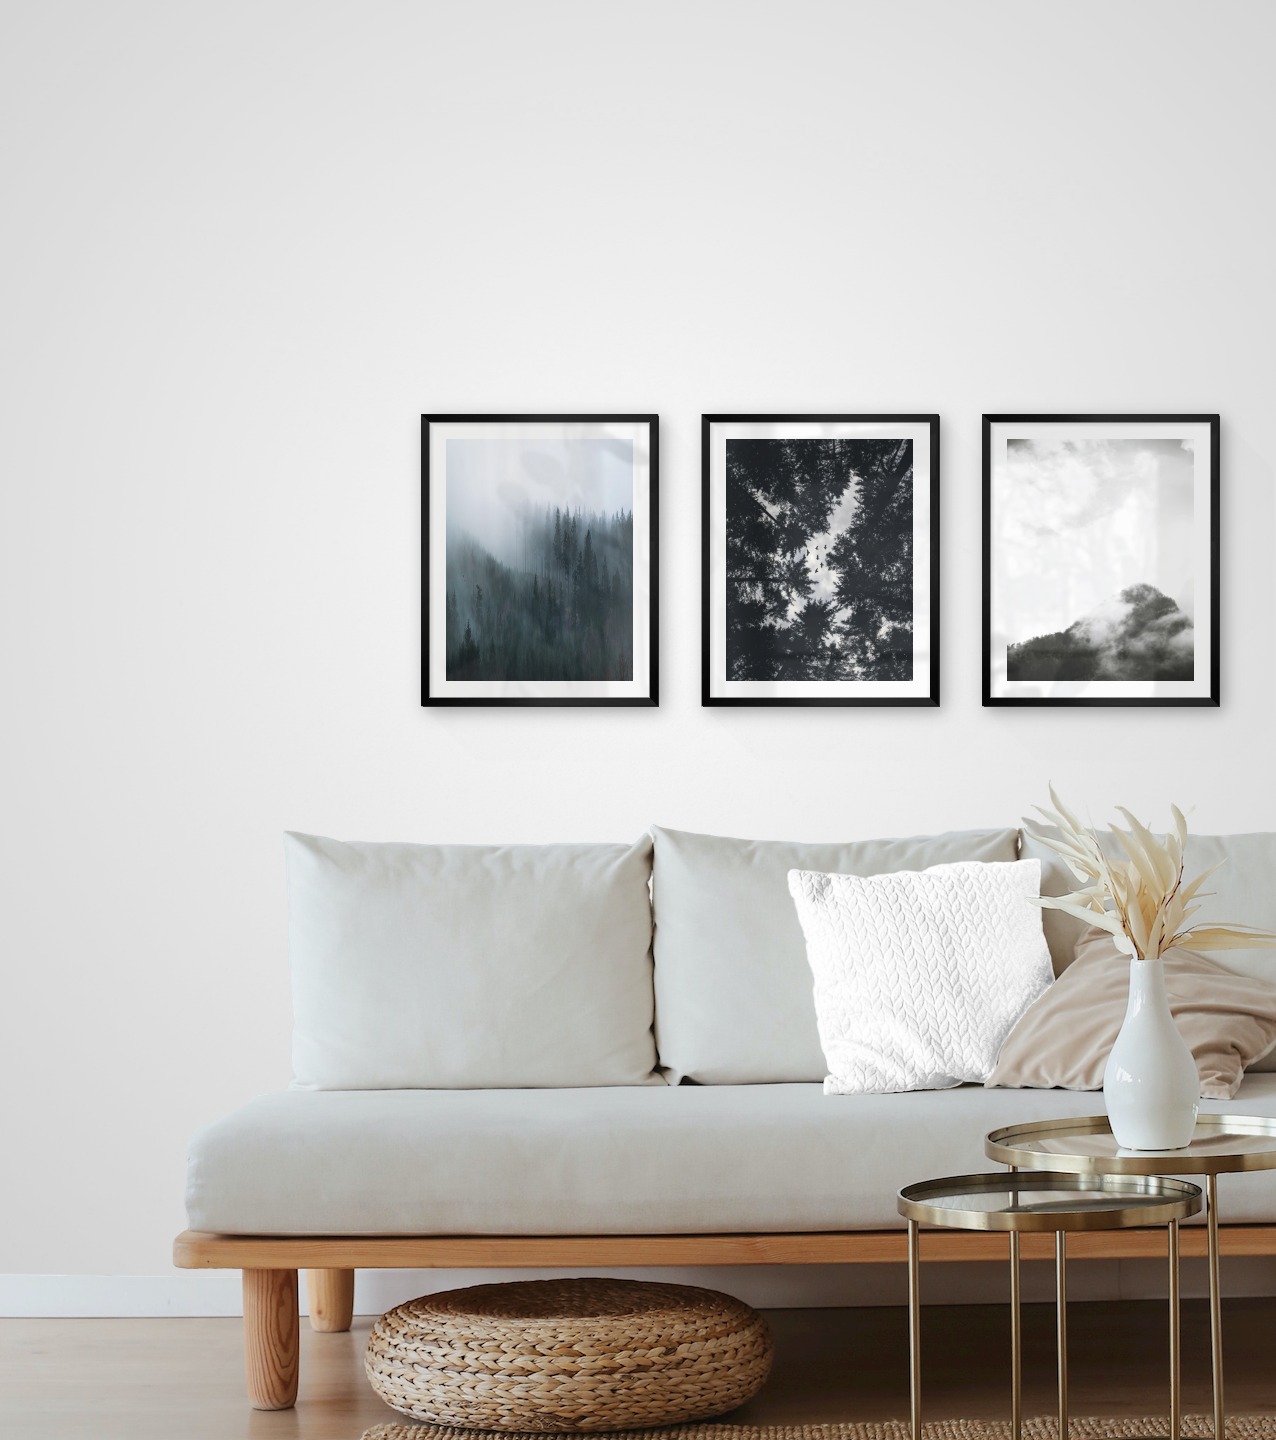 Gallery wall with picture frames in black in sizes 40x50 with prints "Foggy forest", "Wooden tops and birds" and "Trees and mountains in fog"